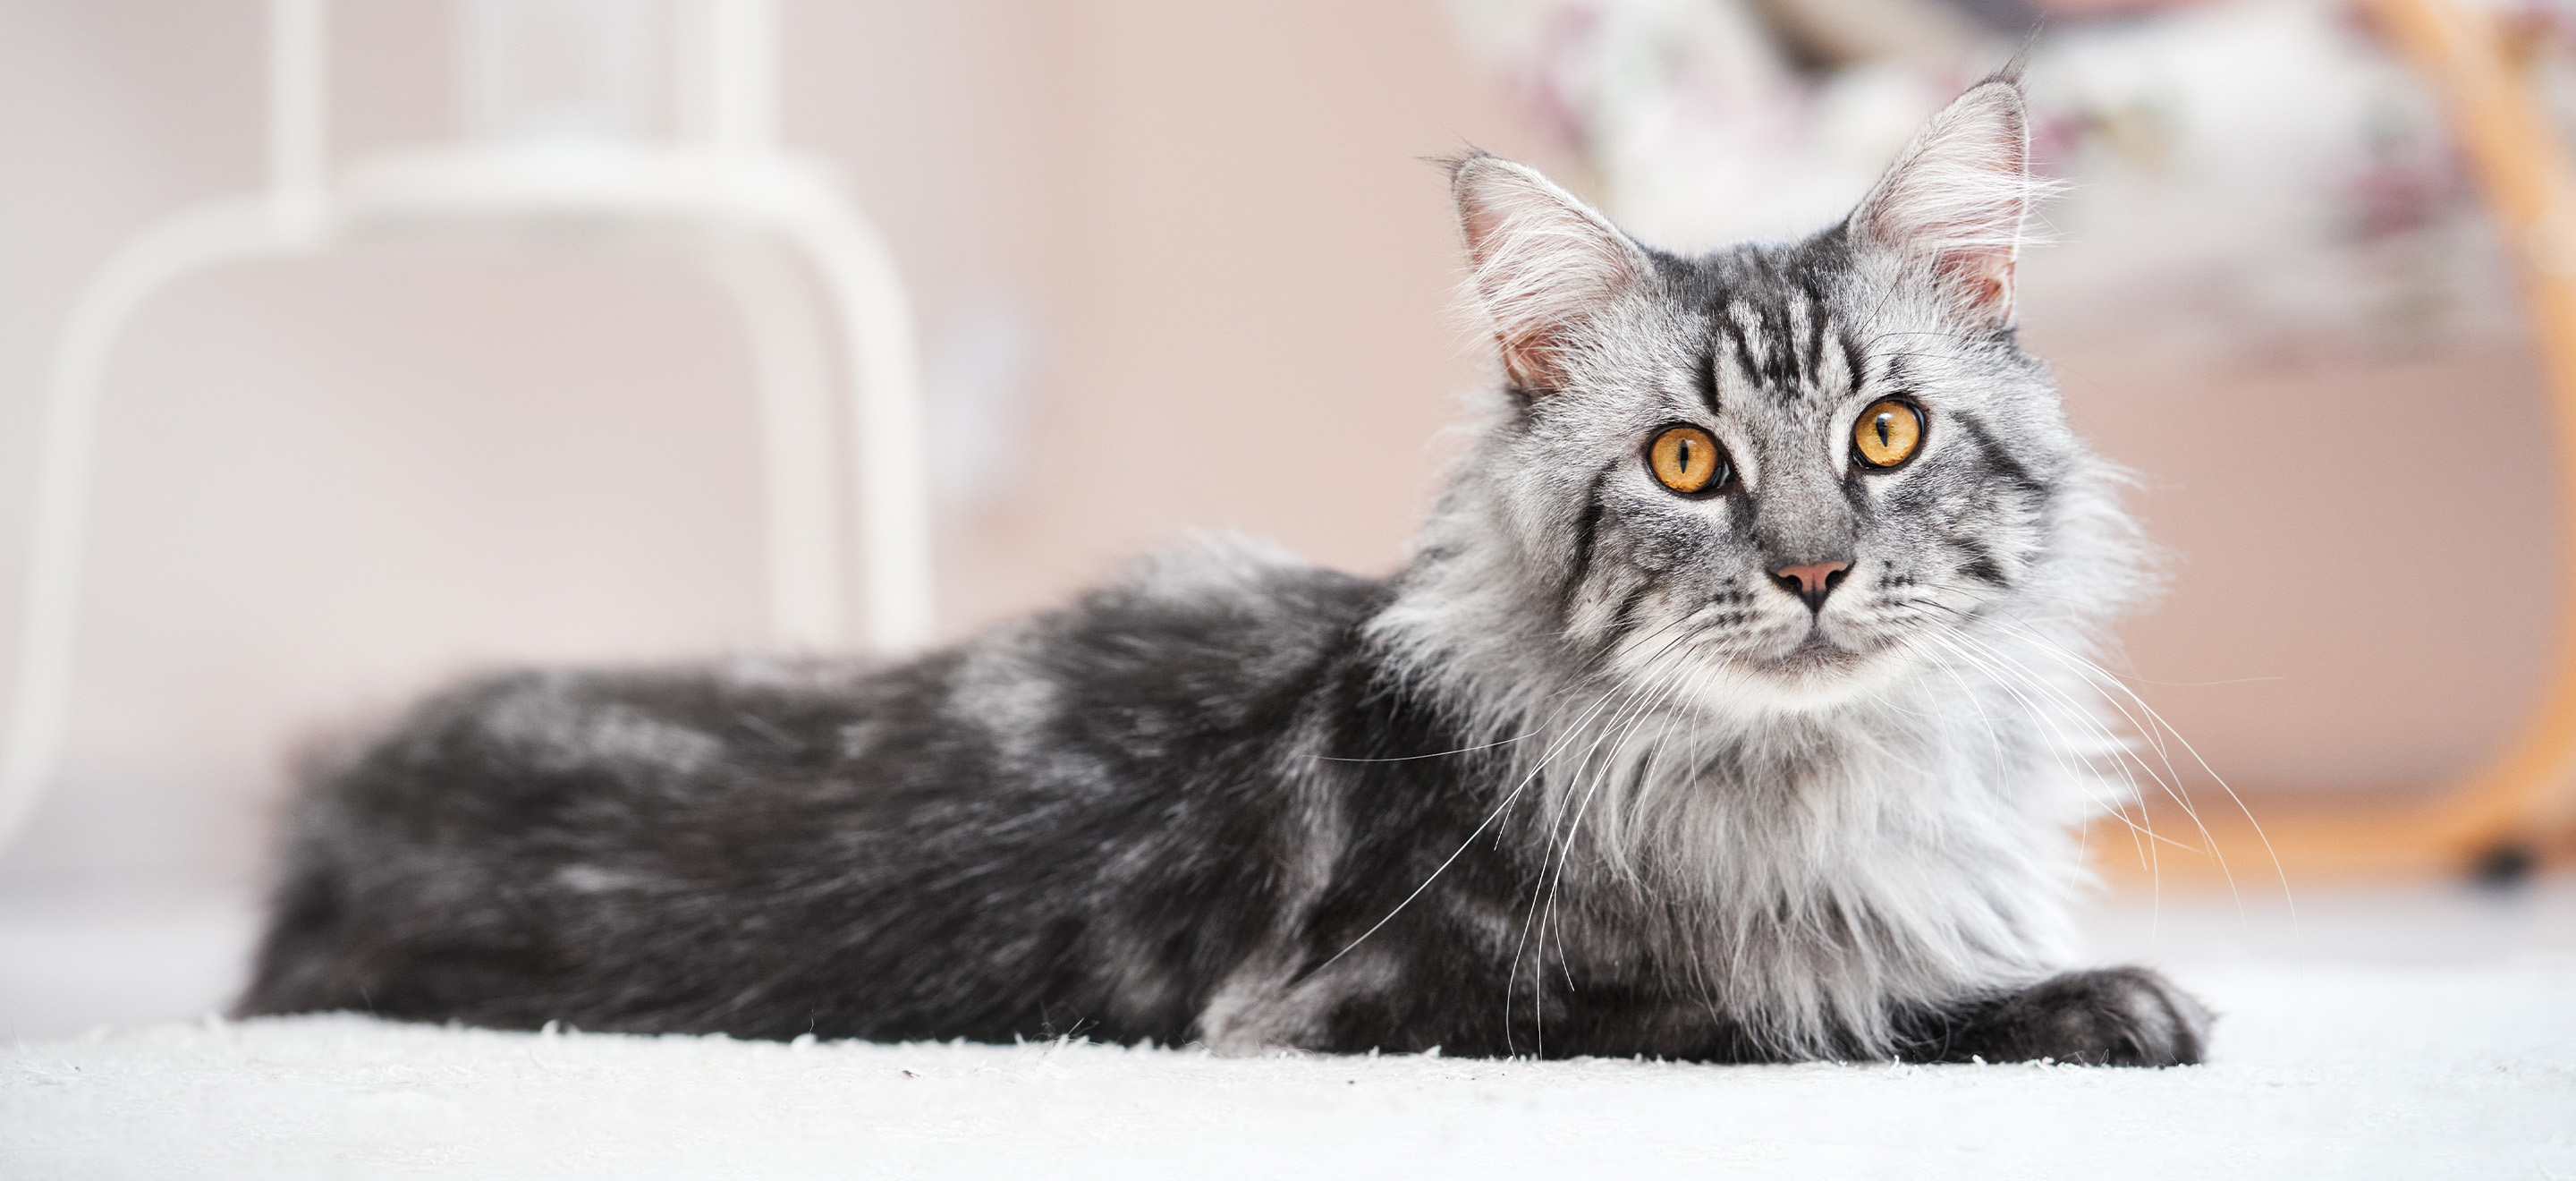 Gray and black Maine Coon cat with yellow-orange eyes image